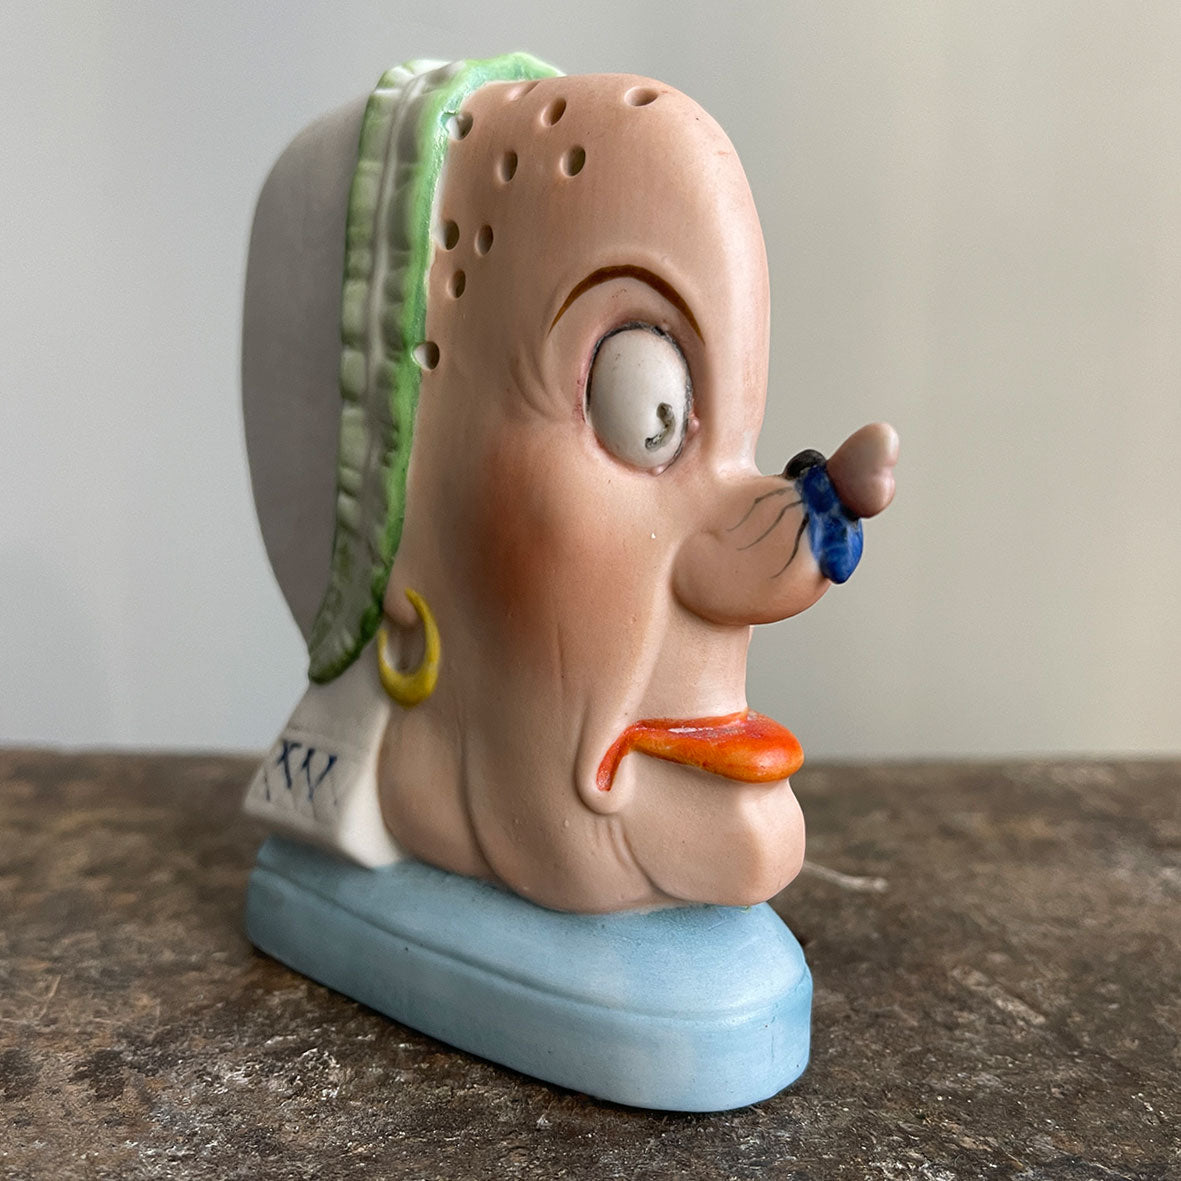 A rare German Porcelain Smoking Ashtray by Schafer & Vater. These unusual objects were used as ashtrays with the smoke of the cigarette escaping through the pierced holes. This one sees an old ugly maid with a fly perched on her nose! SHOP NOW - www.intovintage.co.uk